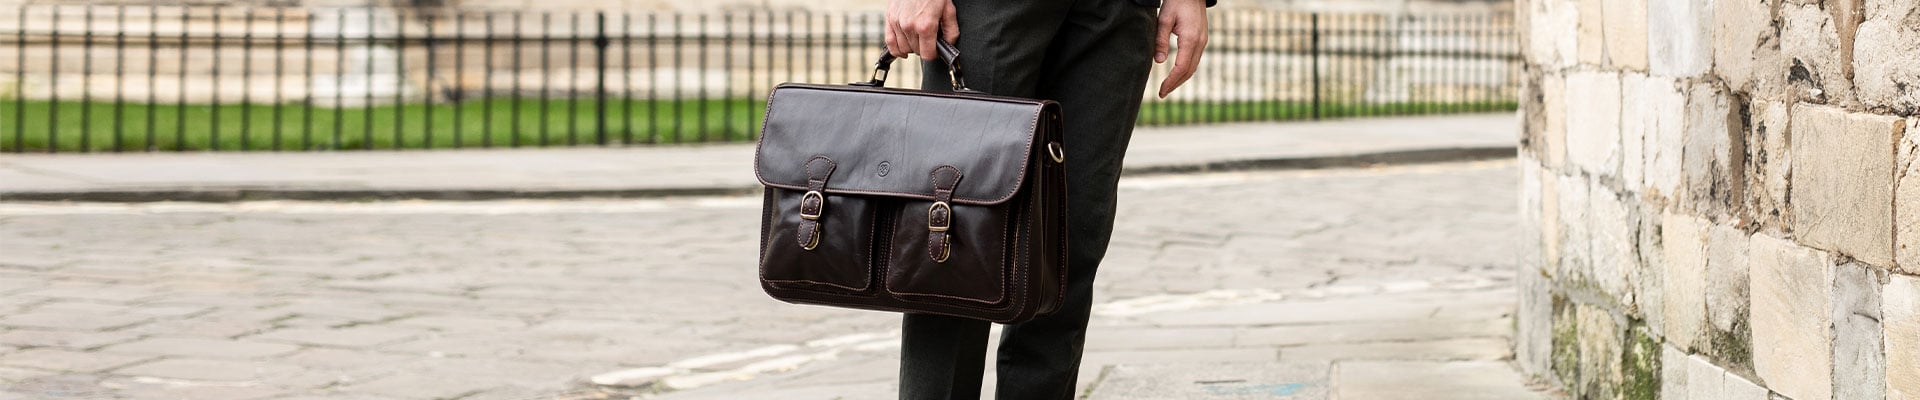 Leather Laptop Briefcases